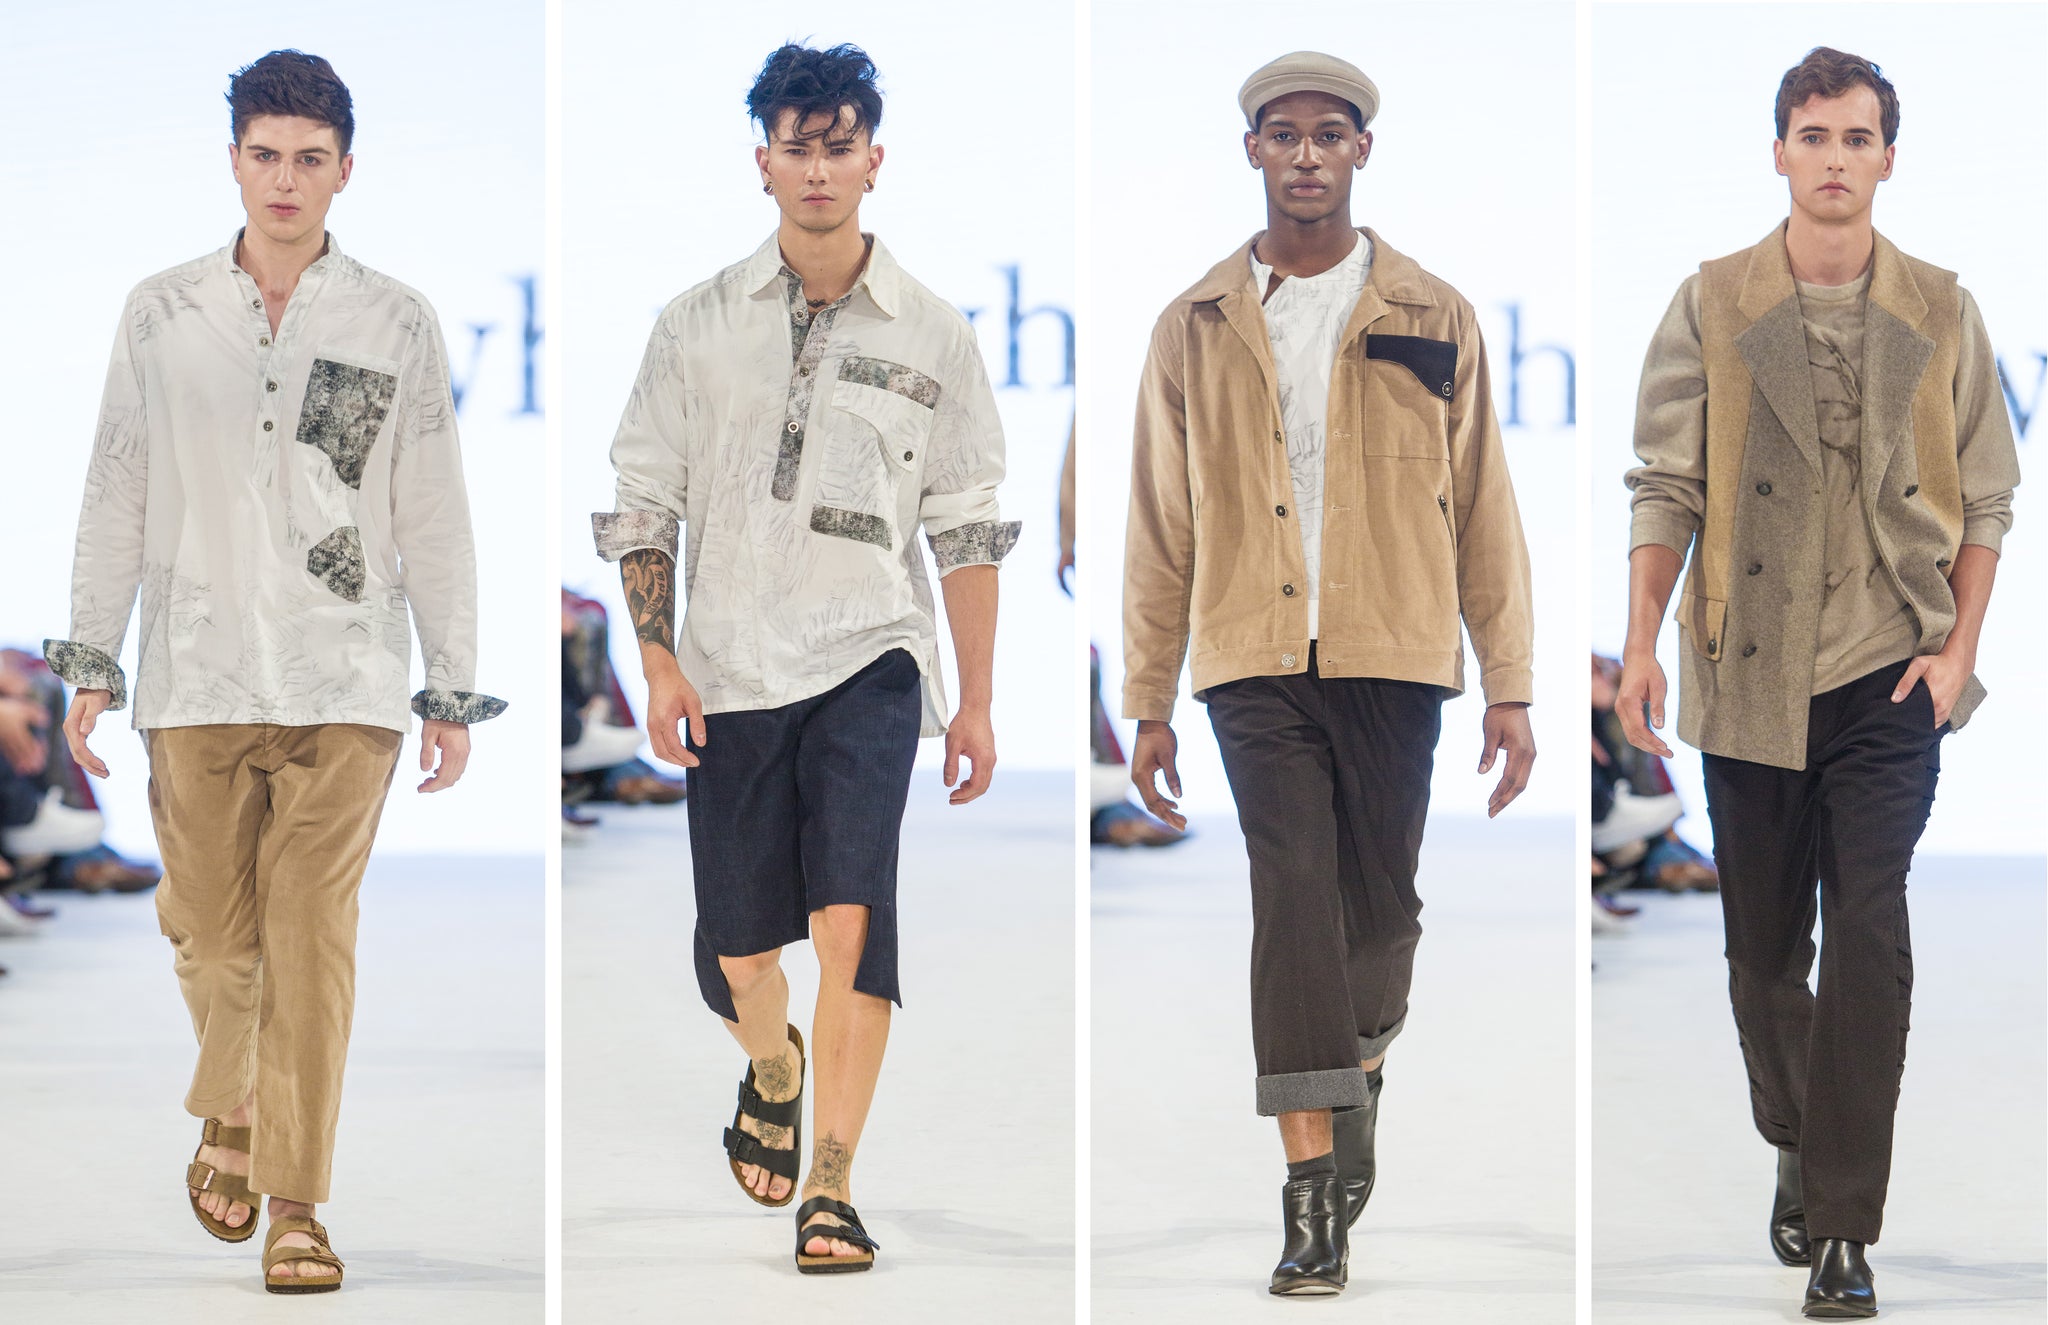 Runway at Toronto Men's Fashion Week showing Nowhere Studio's digital and handcrafted designs  